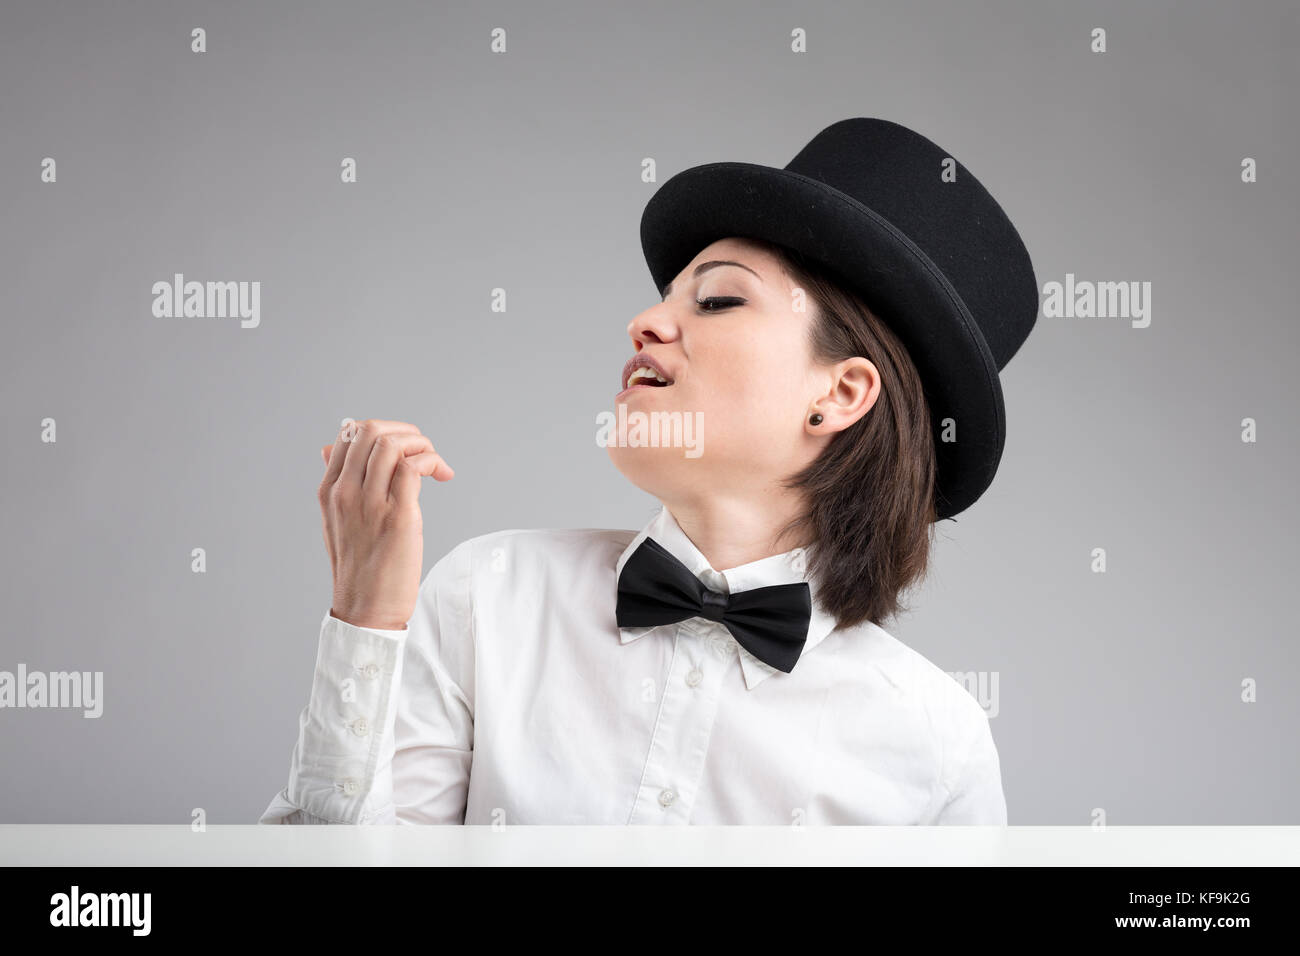 vain woman in top hat showing herself off and Stock Photo